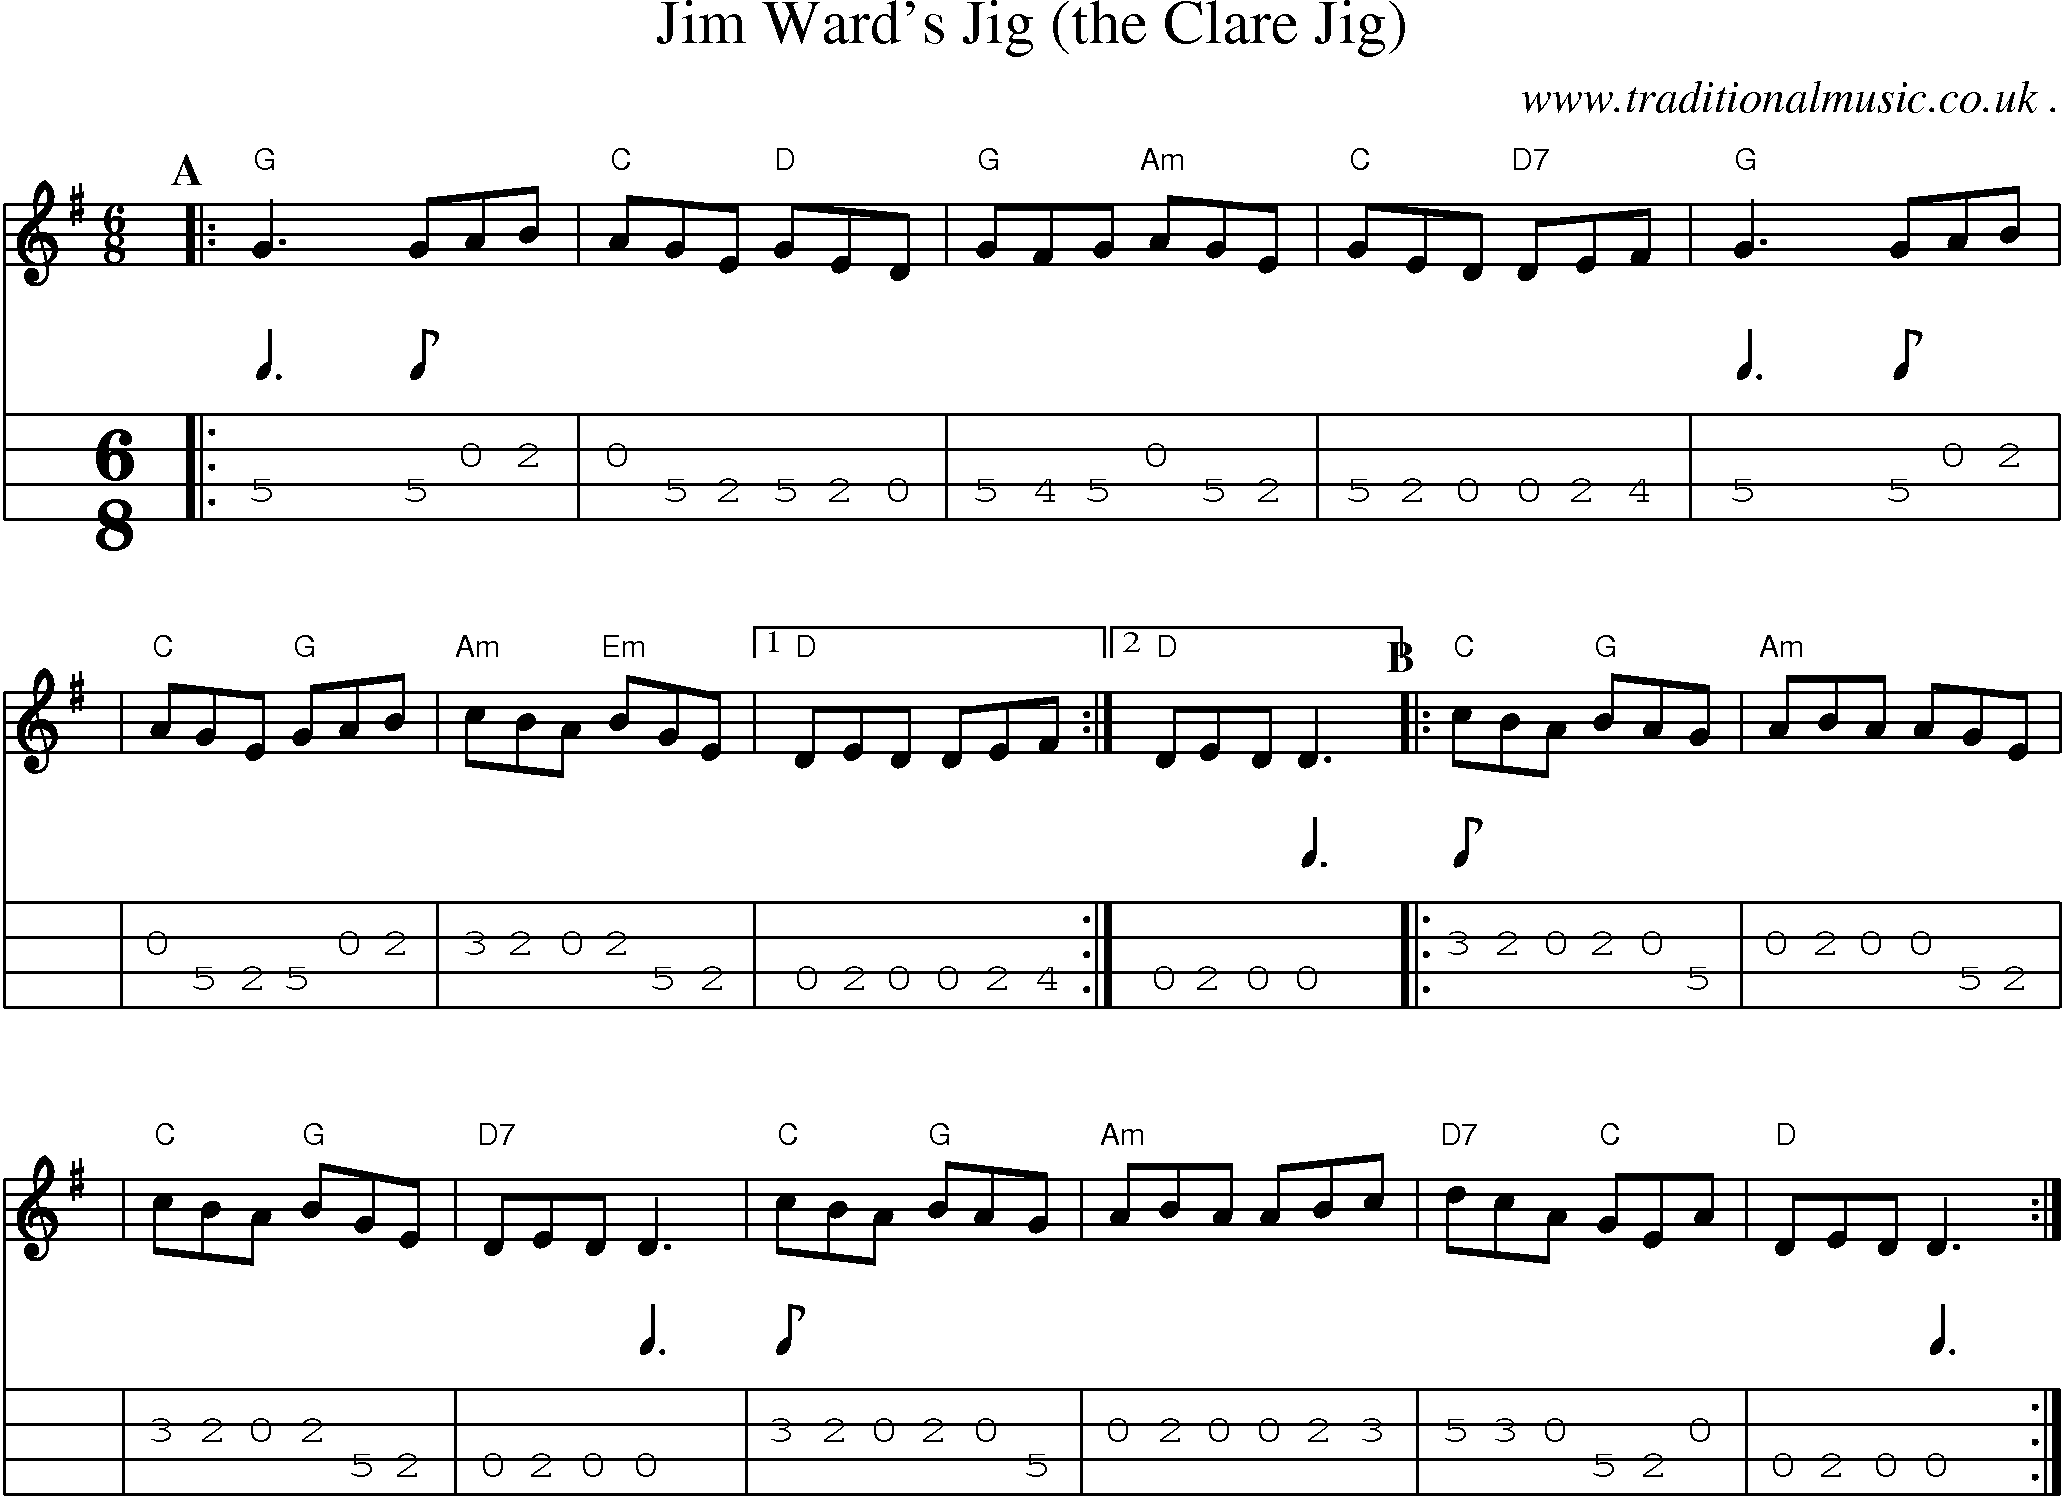 Sheet-music  score, Chords and Mandolin Tabs for Jim Wards Jig The Clare Jig